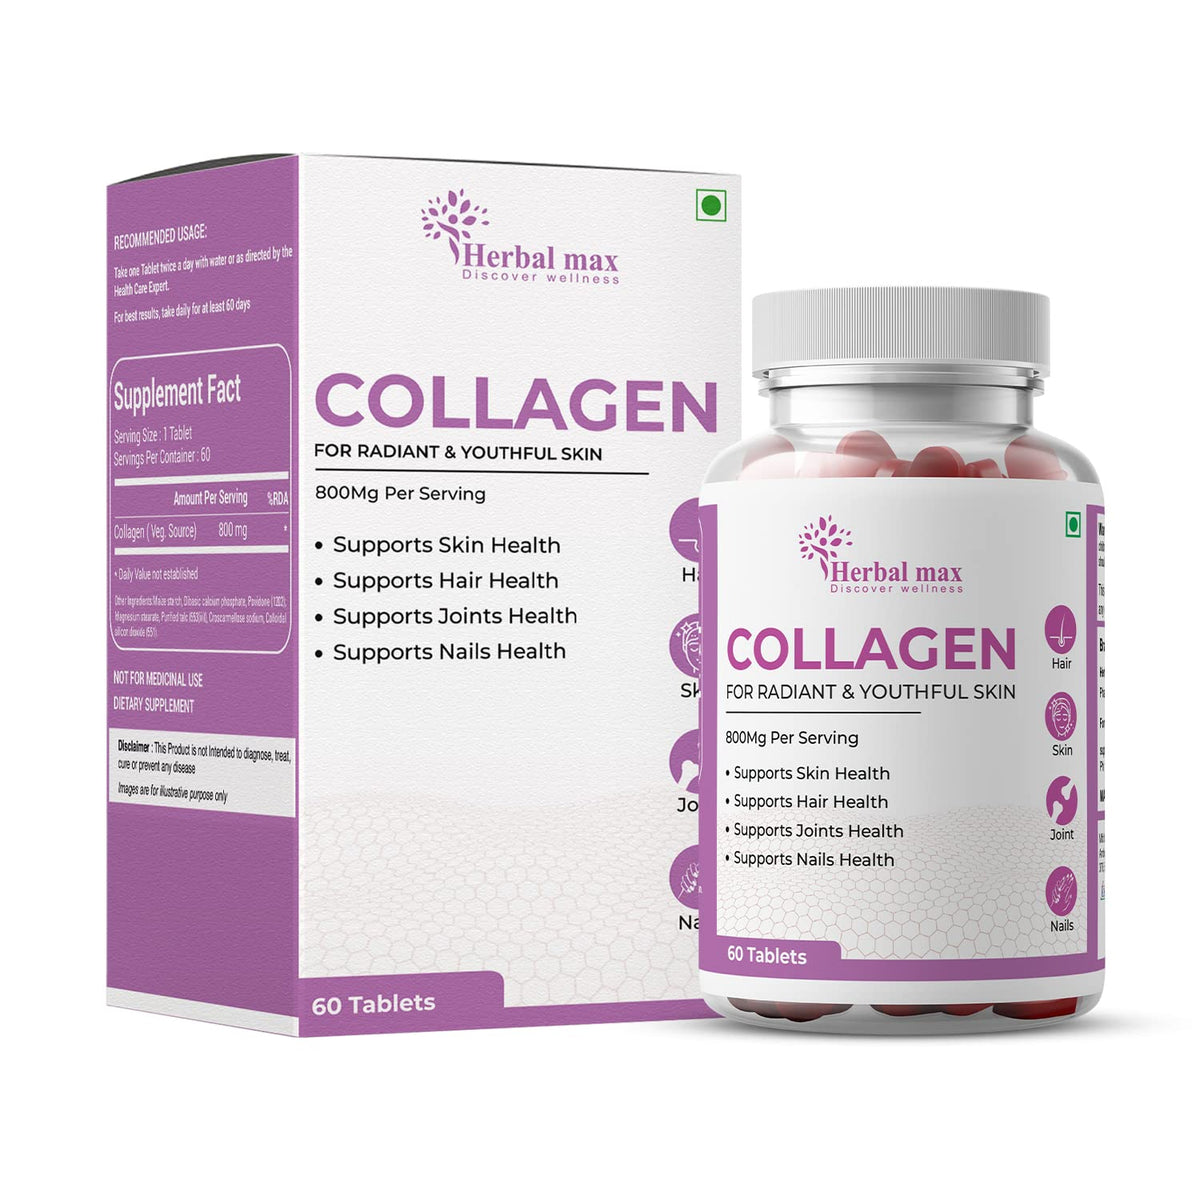 Herbal max Collagen 60 Tablets 800Mg